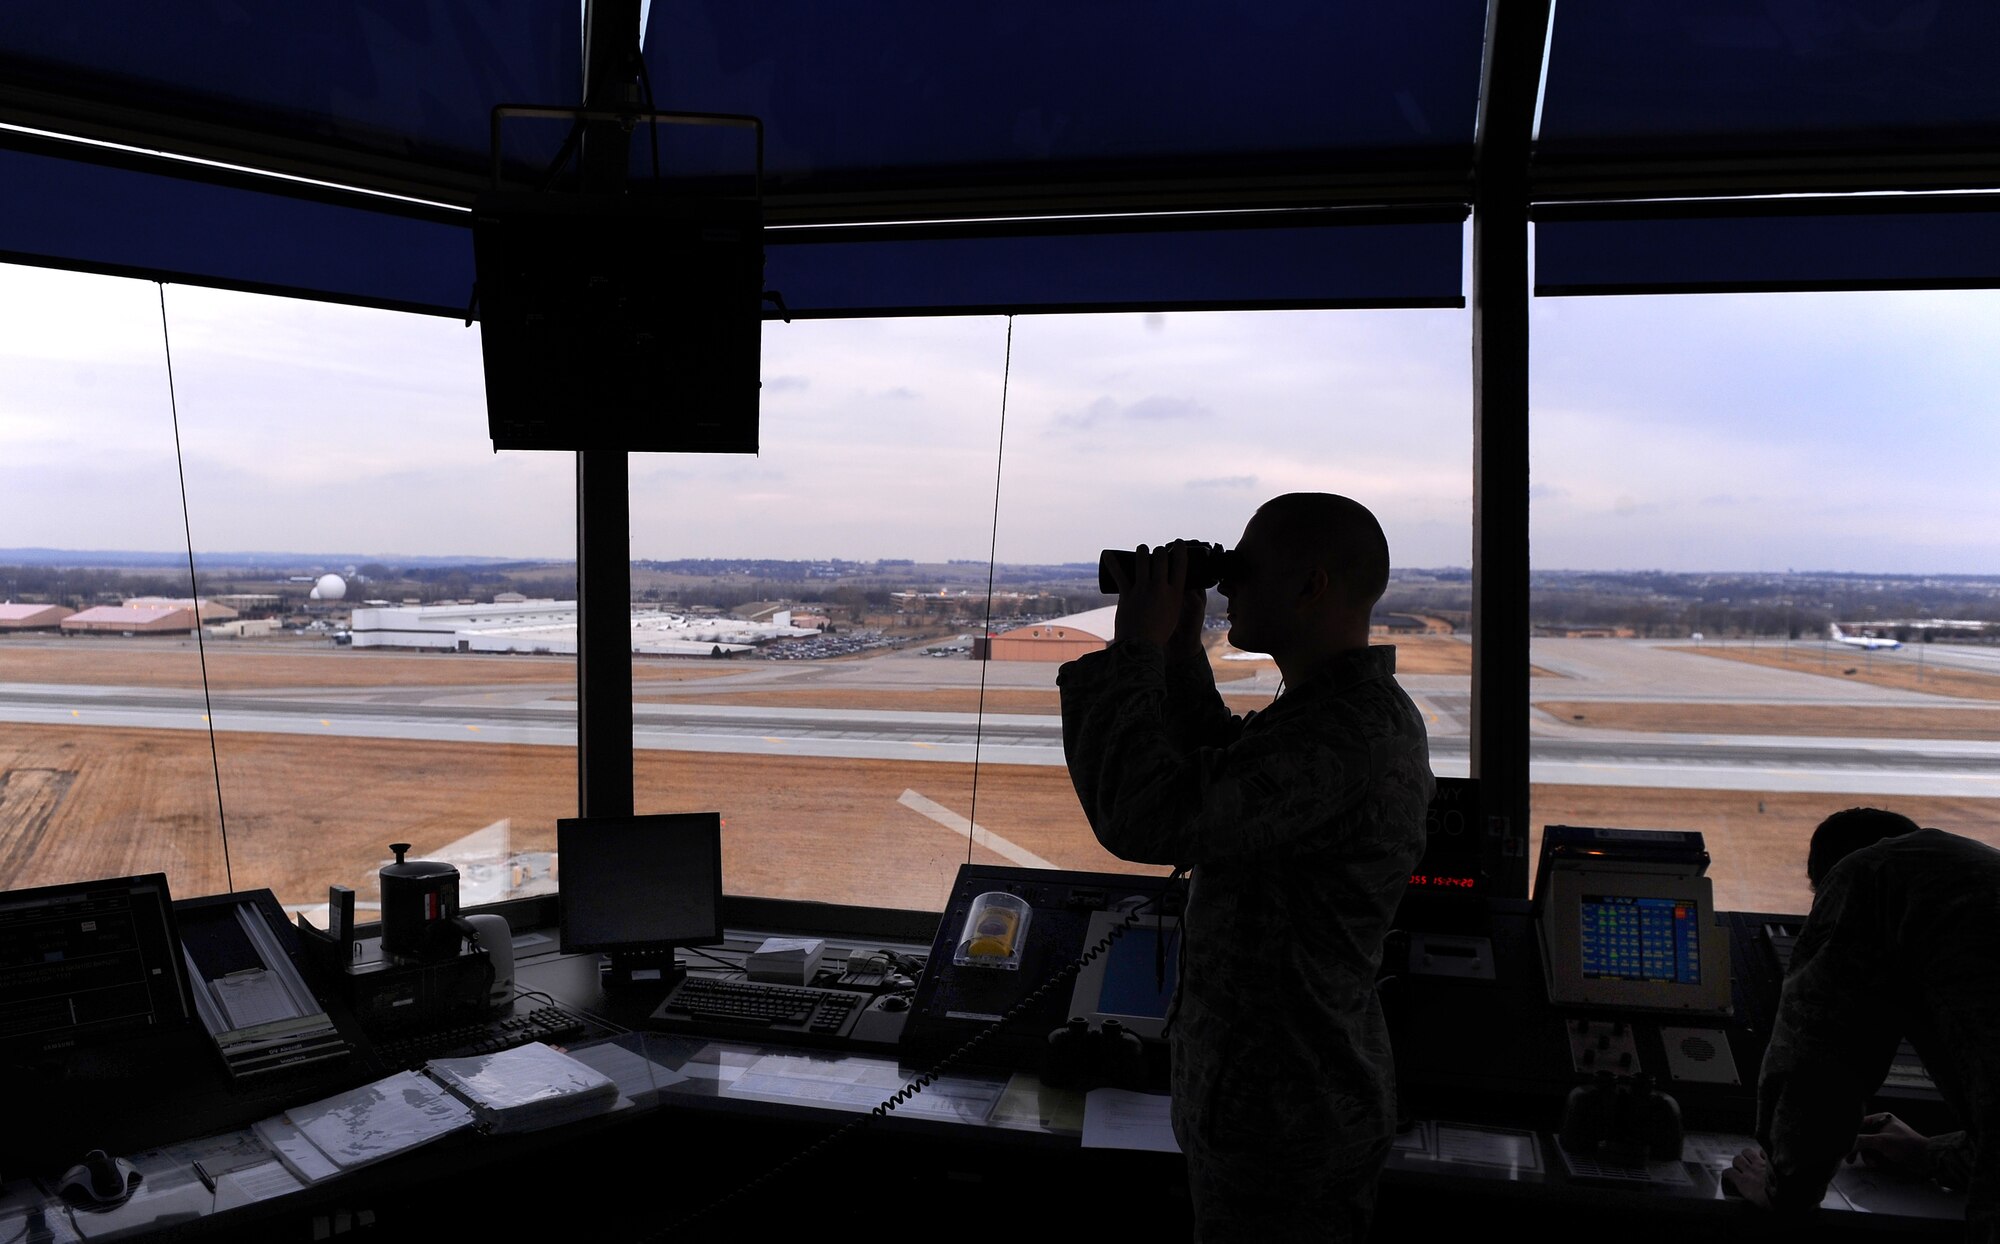 OFFUTT AIR FORCE BASE, Neb. - Airman 1st Class Adam Karre, an air traffic controller apprentice assigned to the 55th Operations Support Squadron, monitors west bound incoming aircraft descending here, Feb. 24. U.S. Air Force Photo by Josh Plueger (Released)
